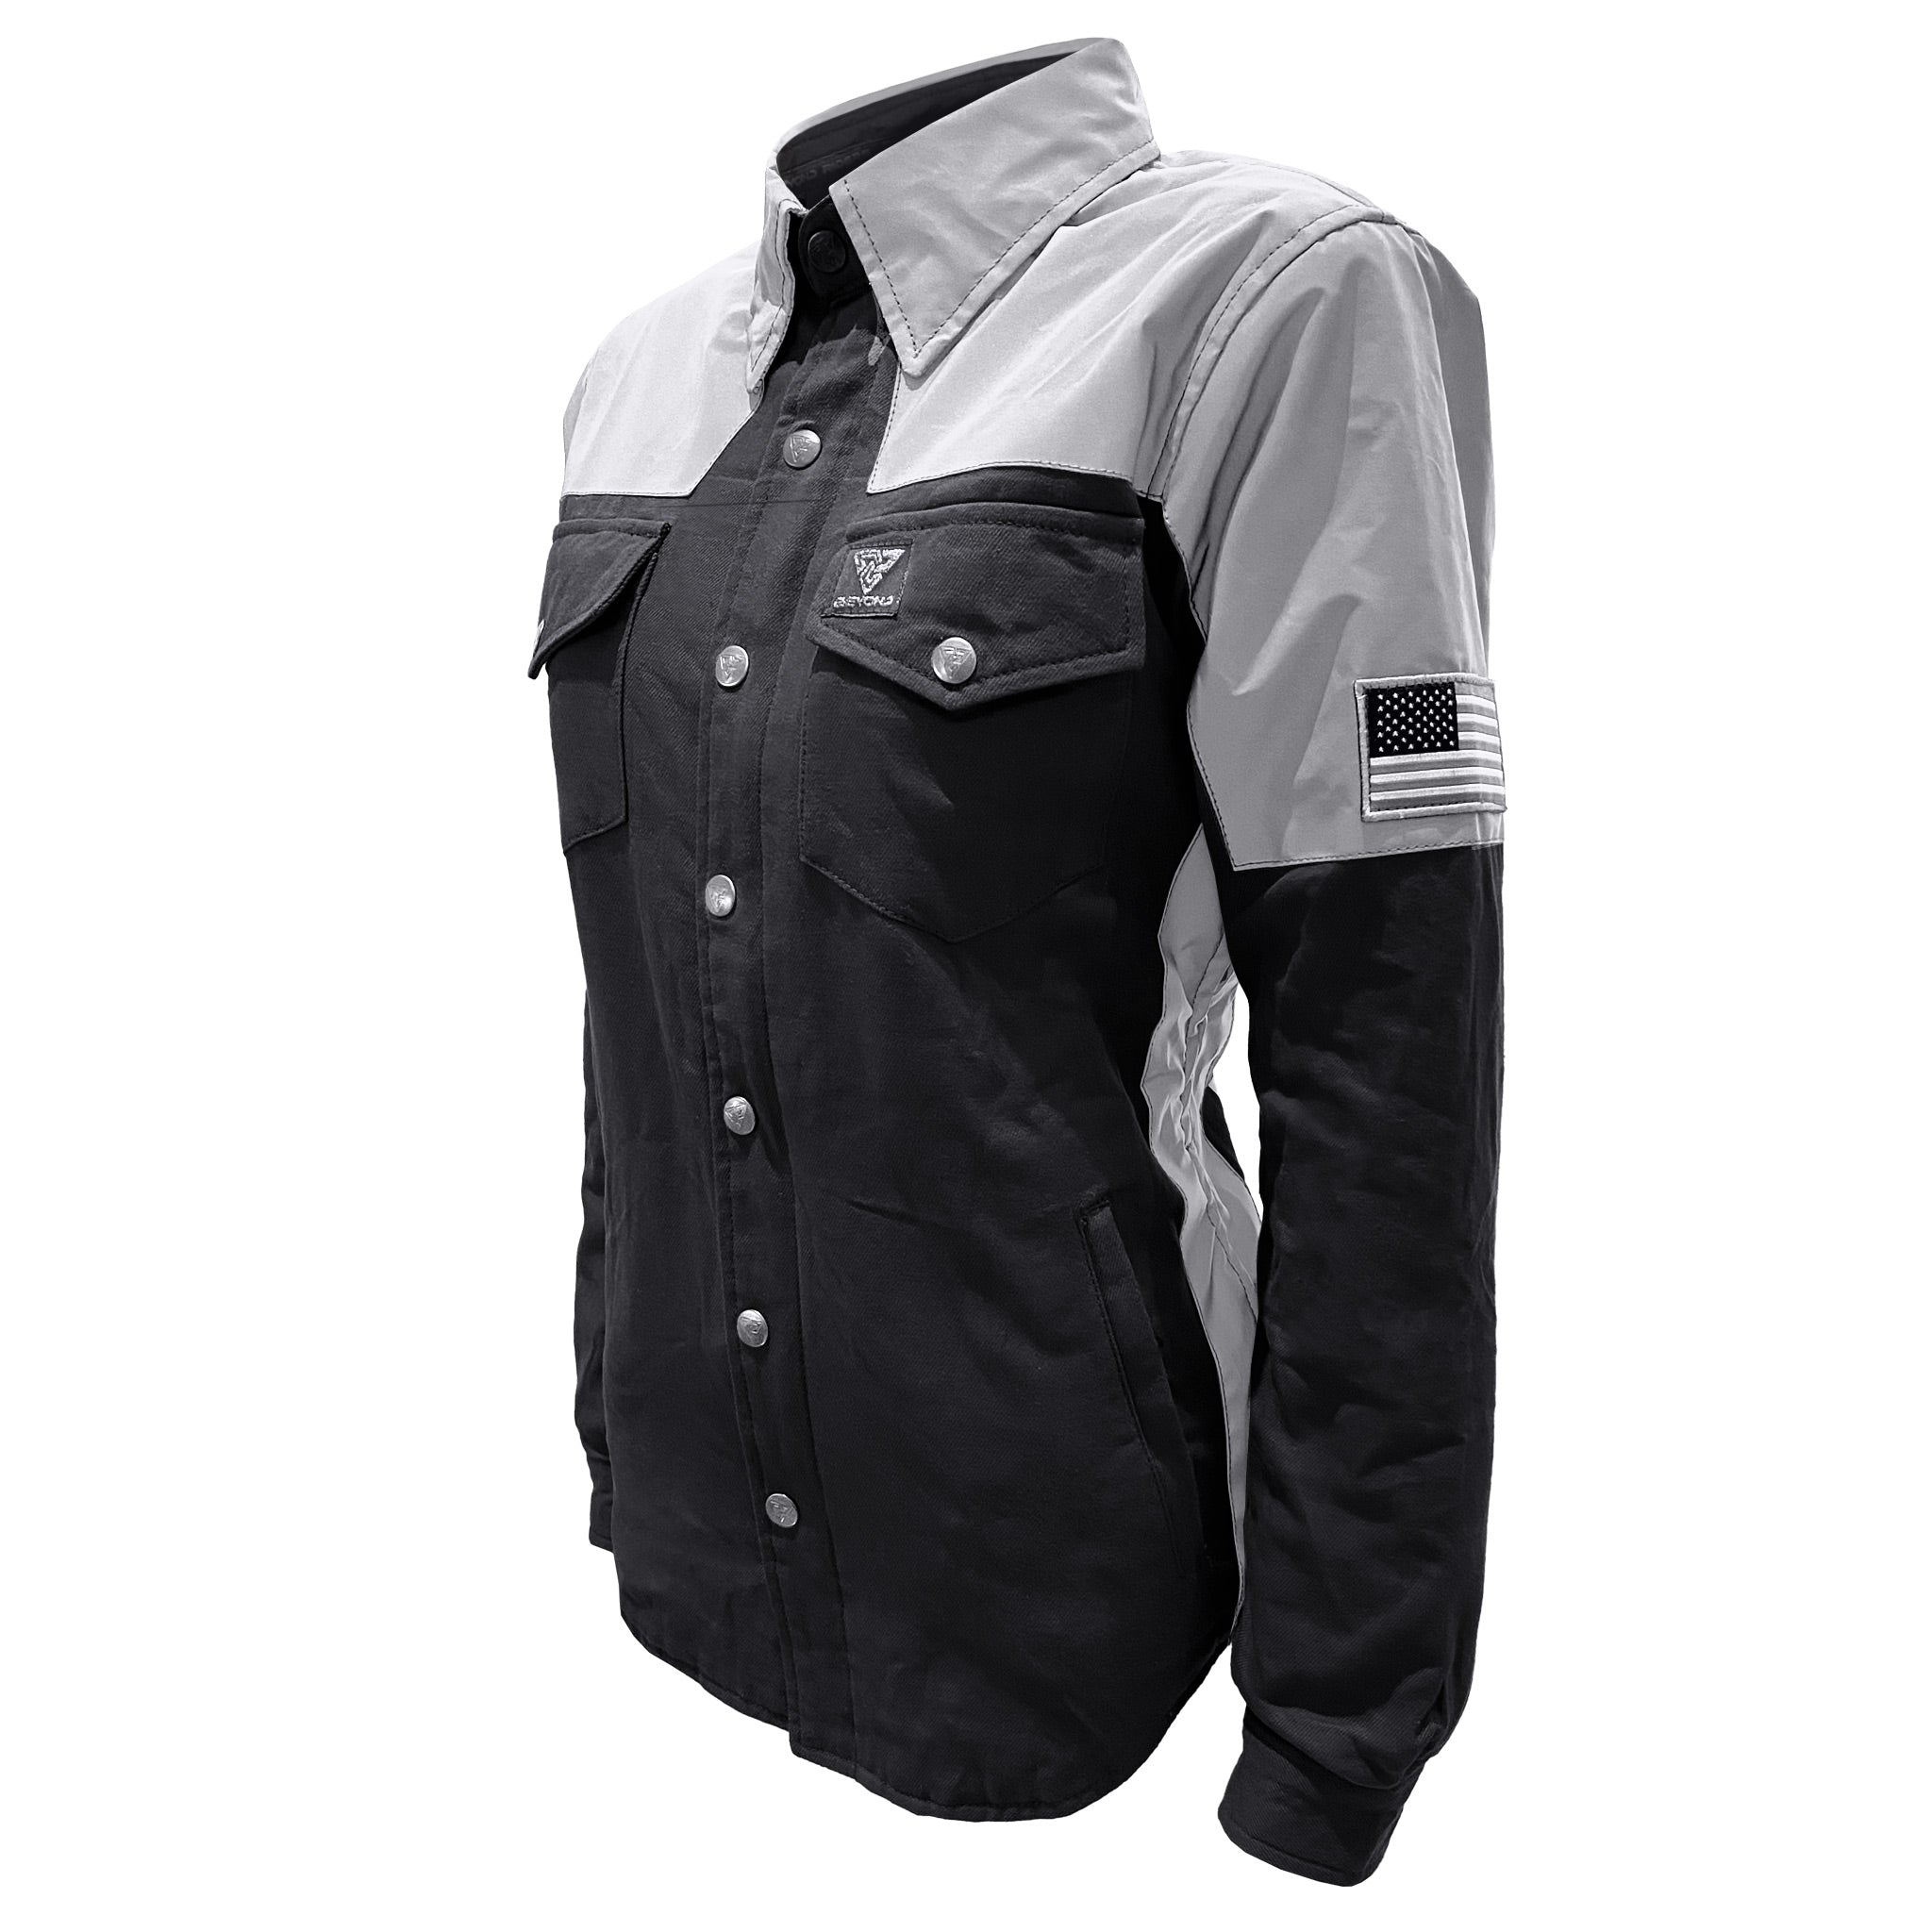 Flannel Reflective Shirt "Alloy Eclipse" for Women - Black and Silver with Pads